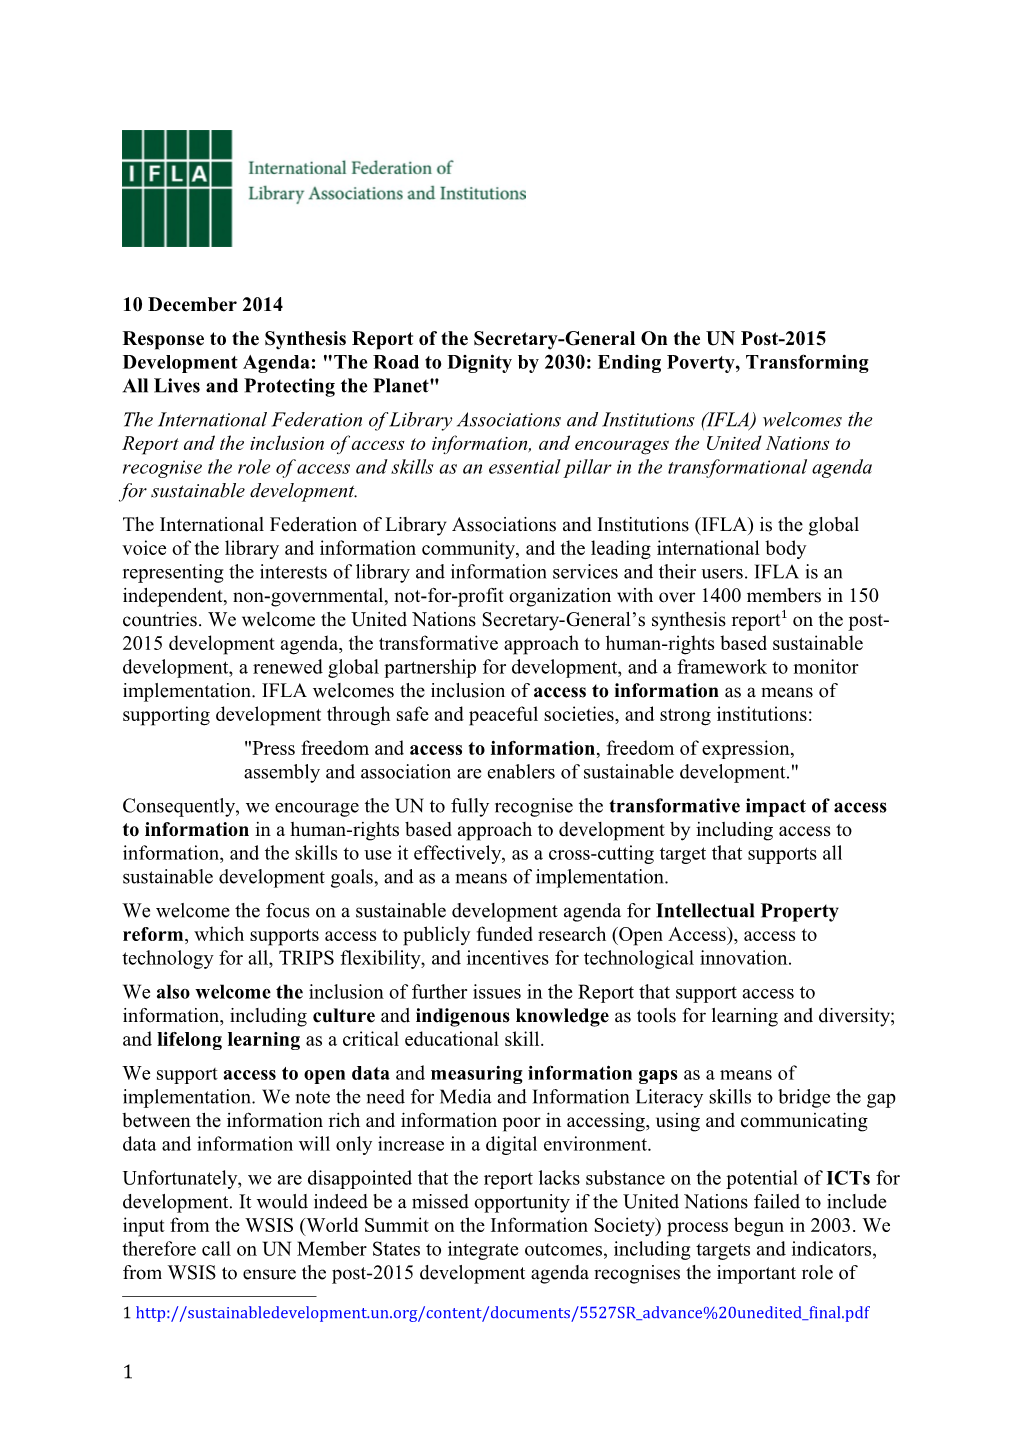 Response to the Synthesis Report of the Secretary-General on the UN Post-2015 Development